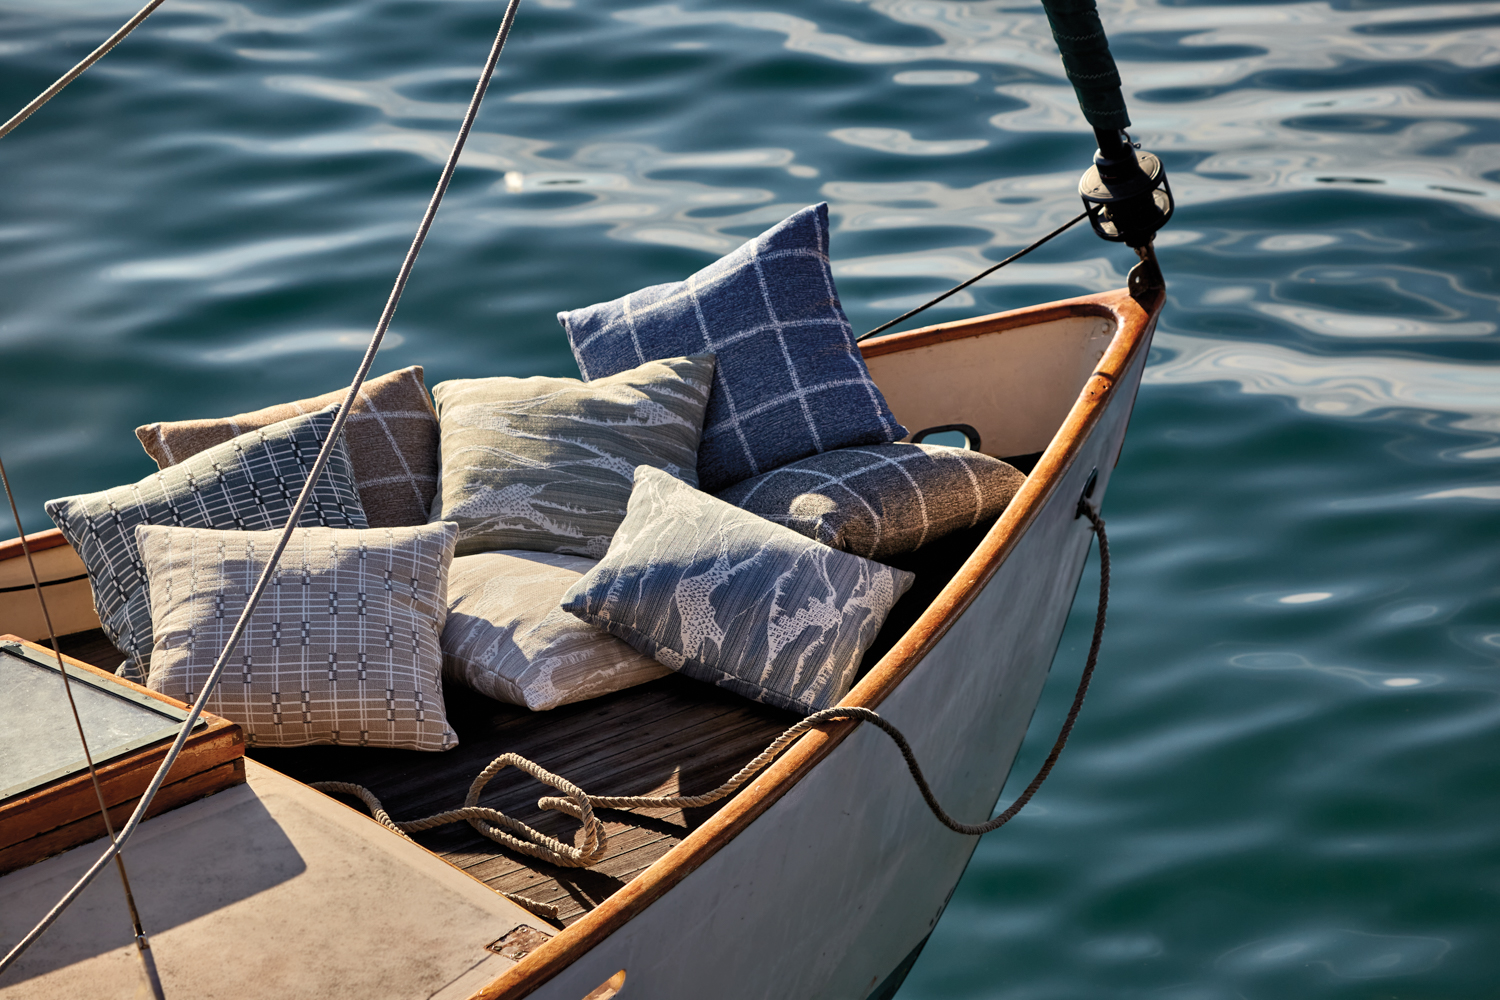 Brook Perdigon pillows covered in blue and gray fabrics strew around the bow of a boat at sea